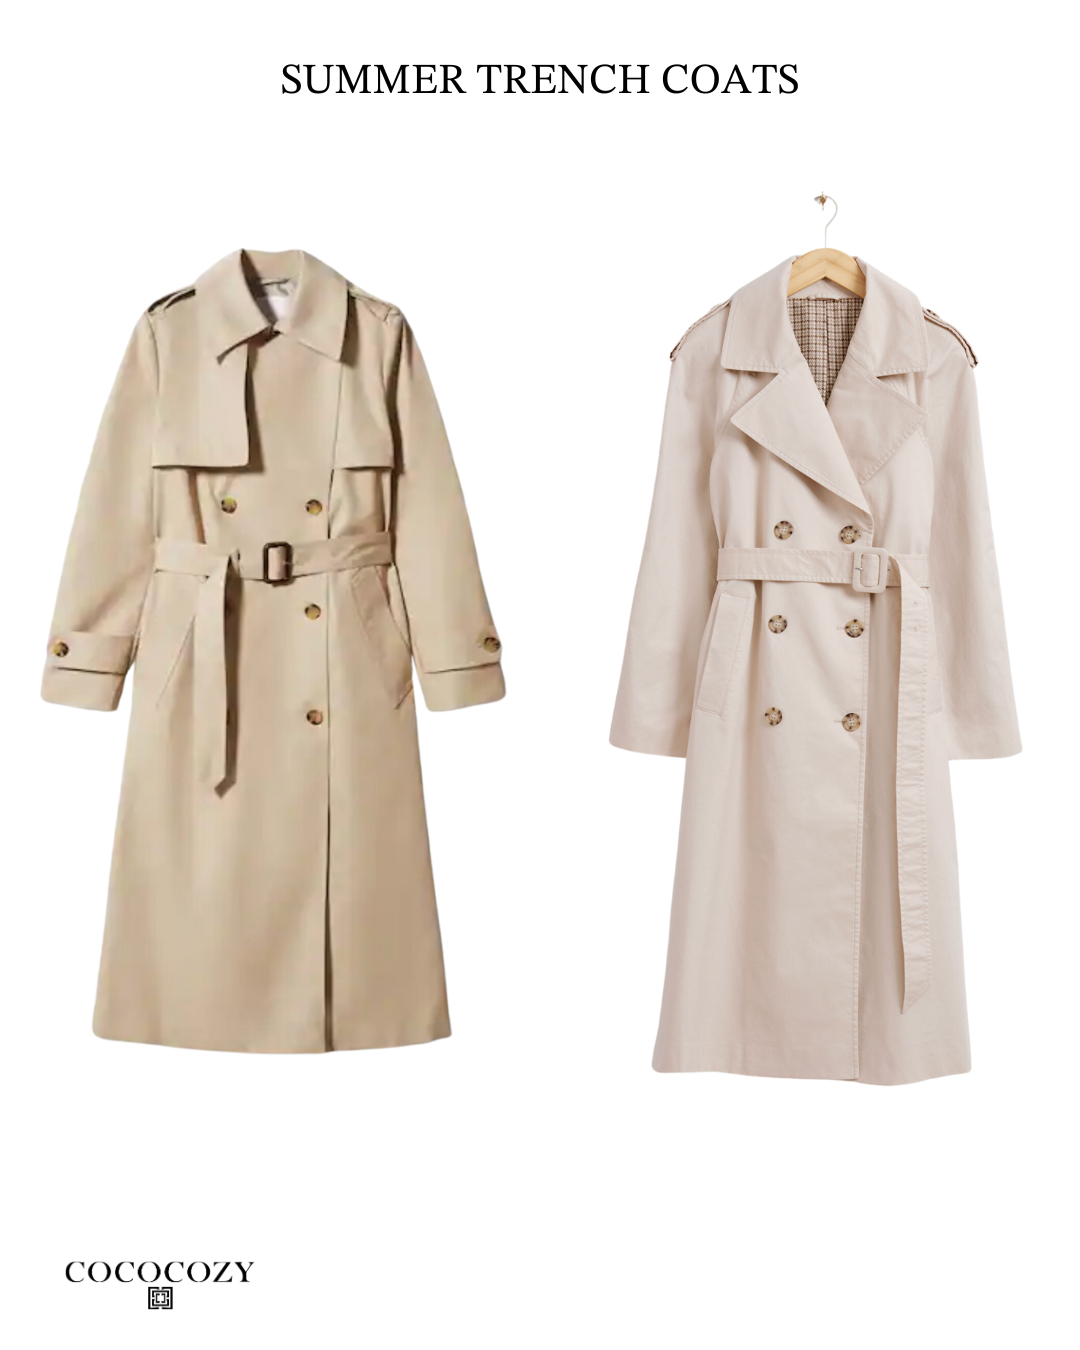 Alt tag for summer trench coats